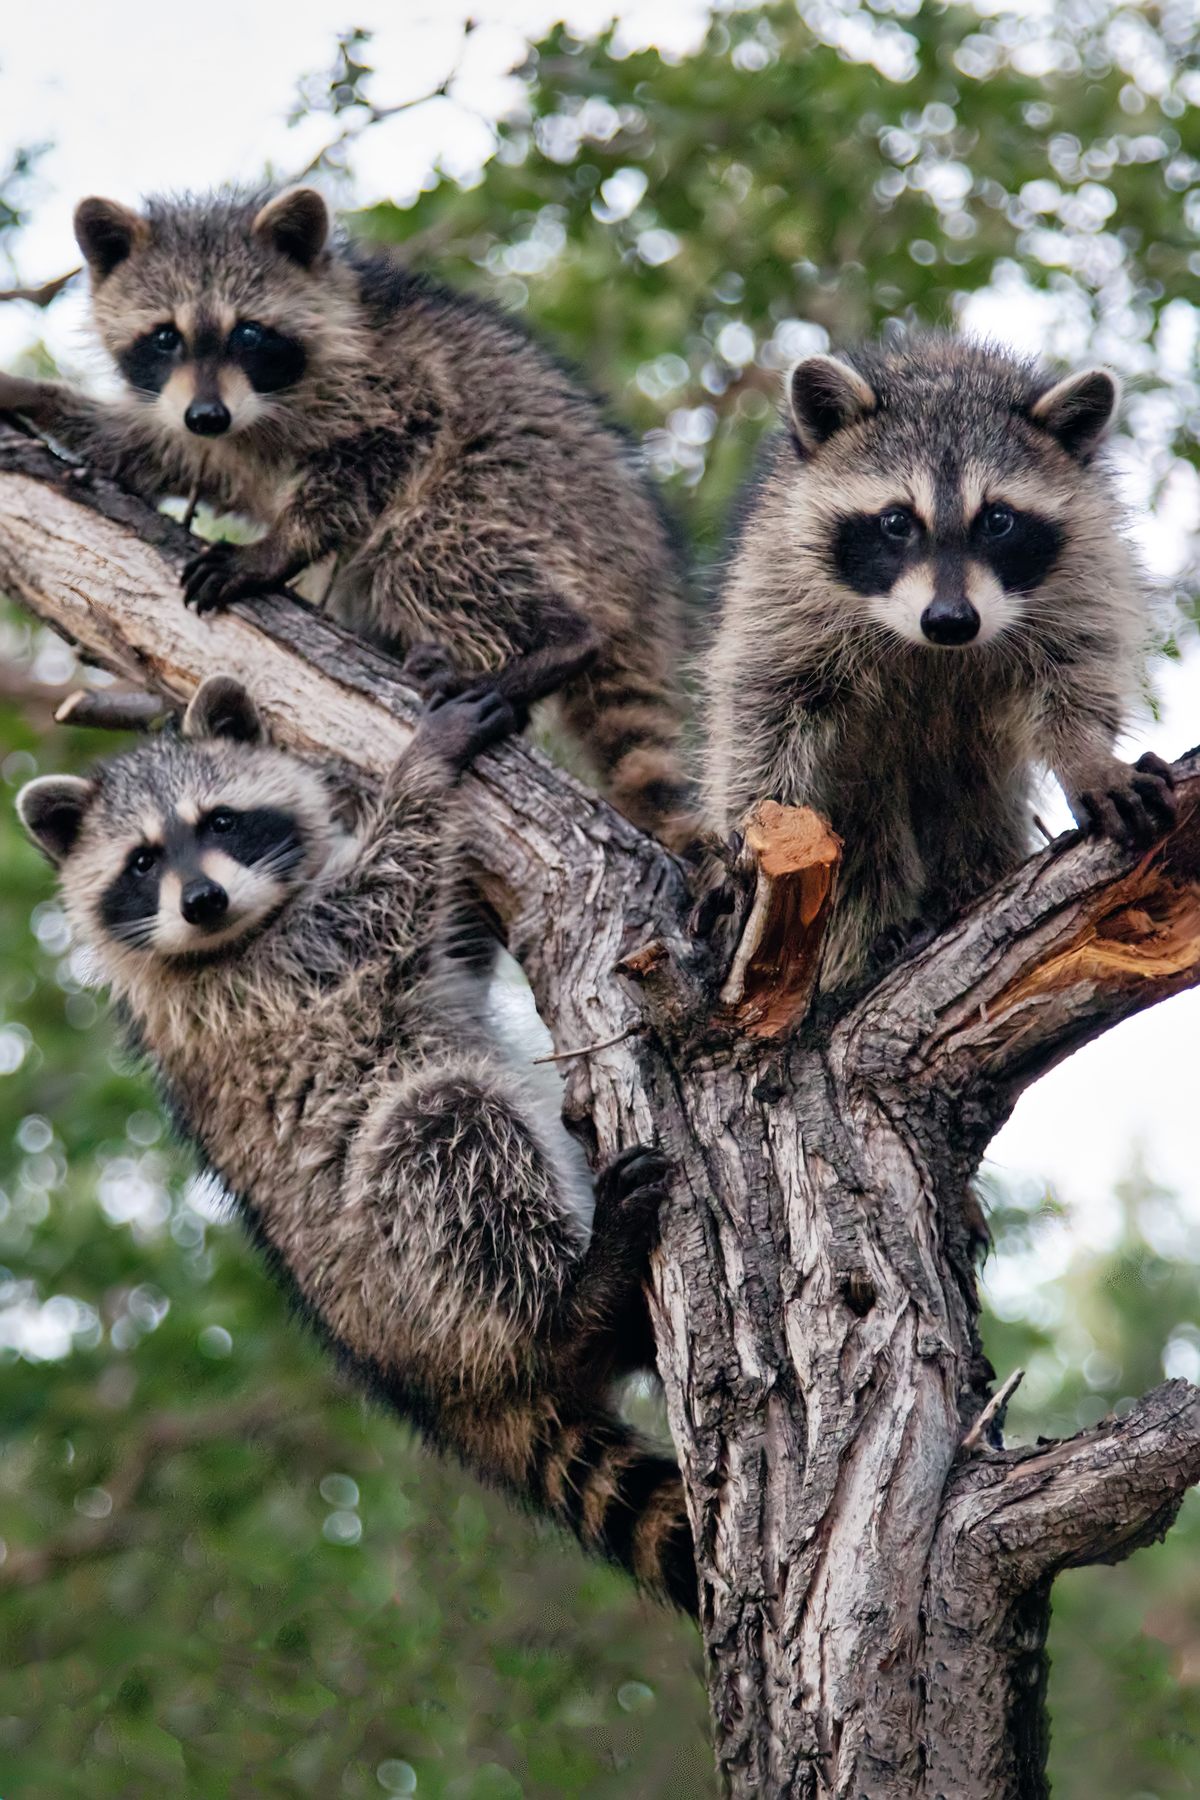 Robert Russell's photograph of three baby raccoons in his backyard in Colorado Springs, Colorado.